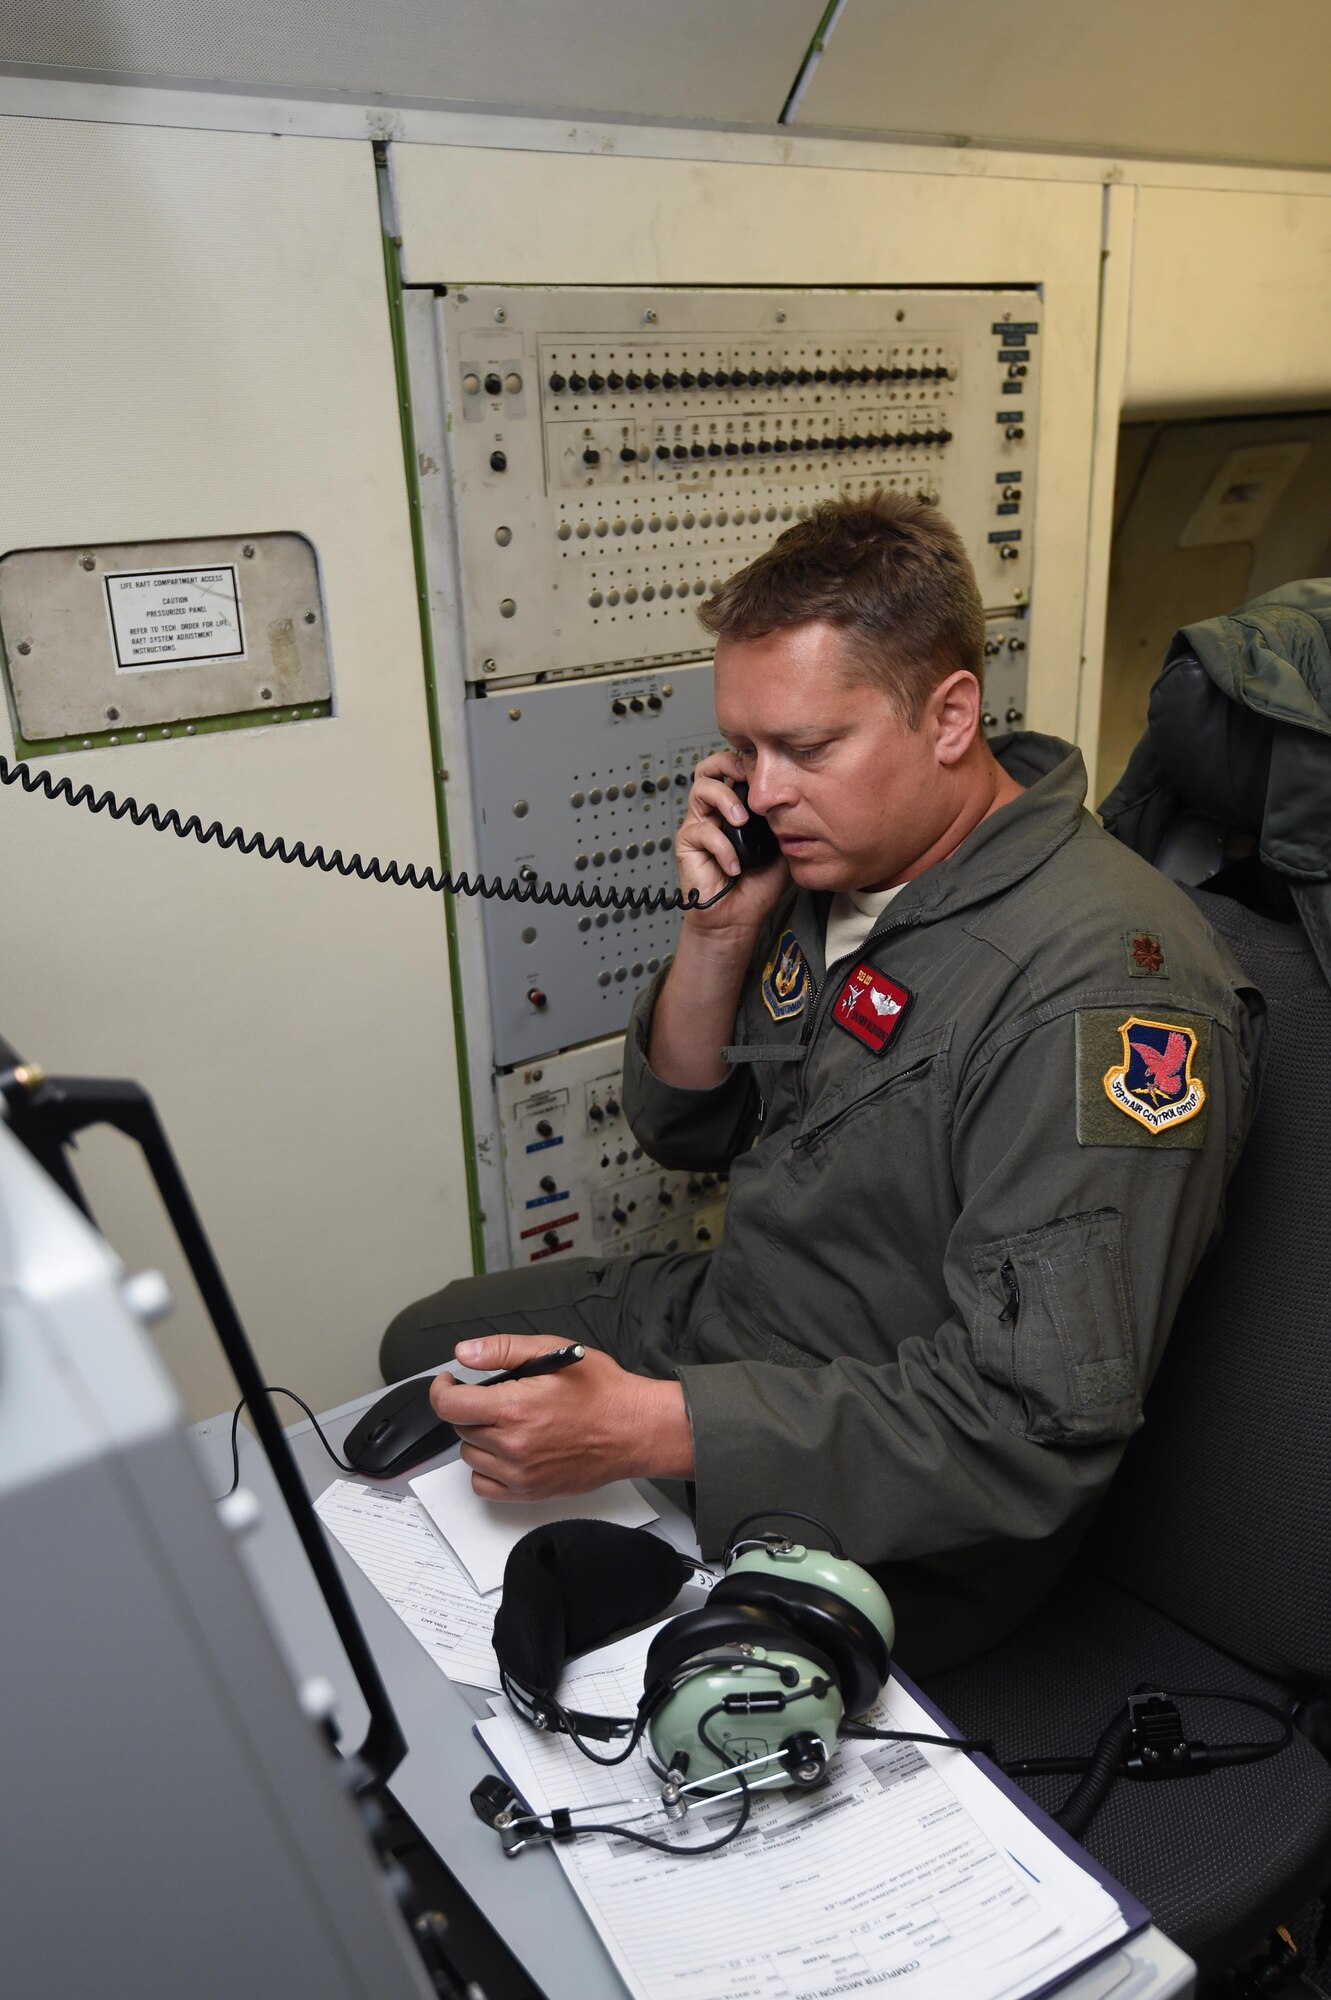 Maj. Shawn Kilbourne, a pilot assigned to the 513th Operations Support Squadron, talks on a satellite phone July 23, 2016, aboard an E-3 Sentry near the Hawaiian Islands during a mission in support of Rim of the Pacific 2016. More than 125 Airmen from the 513th Air Control Group and 552nd Air Control Wing are deployed to Hawaii in support of the RIMPAC 2016 exercise. Twenty-six nations, more than 40 ships and submarines, more than 200 aircraft and 25,000 personnel are participating in RIMPAC from June 30 to Aug. 4, in and around the Hawaiian Islands and Southern California. The world's largest international maritime exercise, RIMPAC provides a unique training opportunity that helps participants foster and sustain the cooperative relationships that are critical to ensuring the safety of sea lanes and security on the world's oceans. RIMPAC 2016 is the 25th exercise in the series that began in 1971. (U.S. Air Force photo by 2nd Lt. Caleb Wanzer)